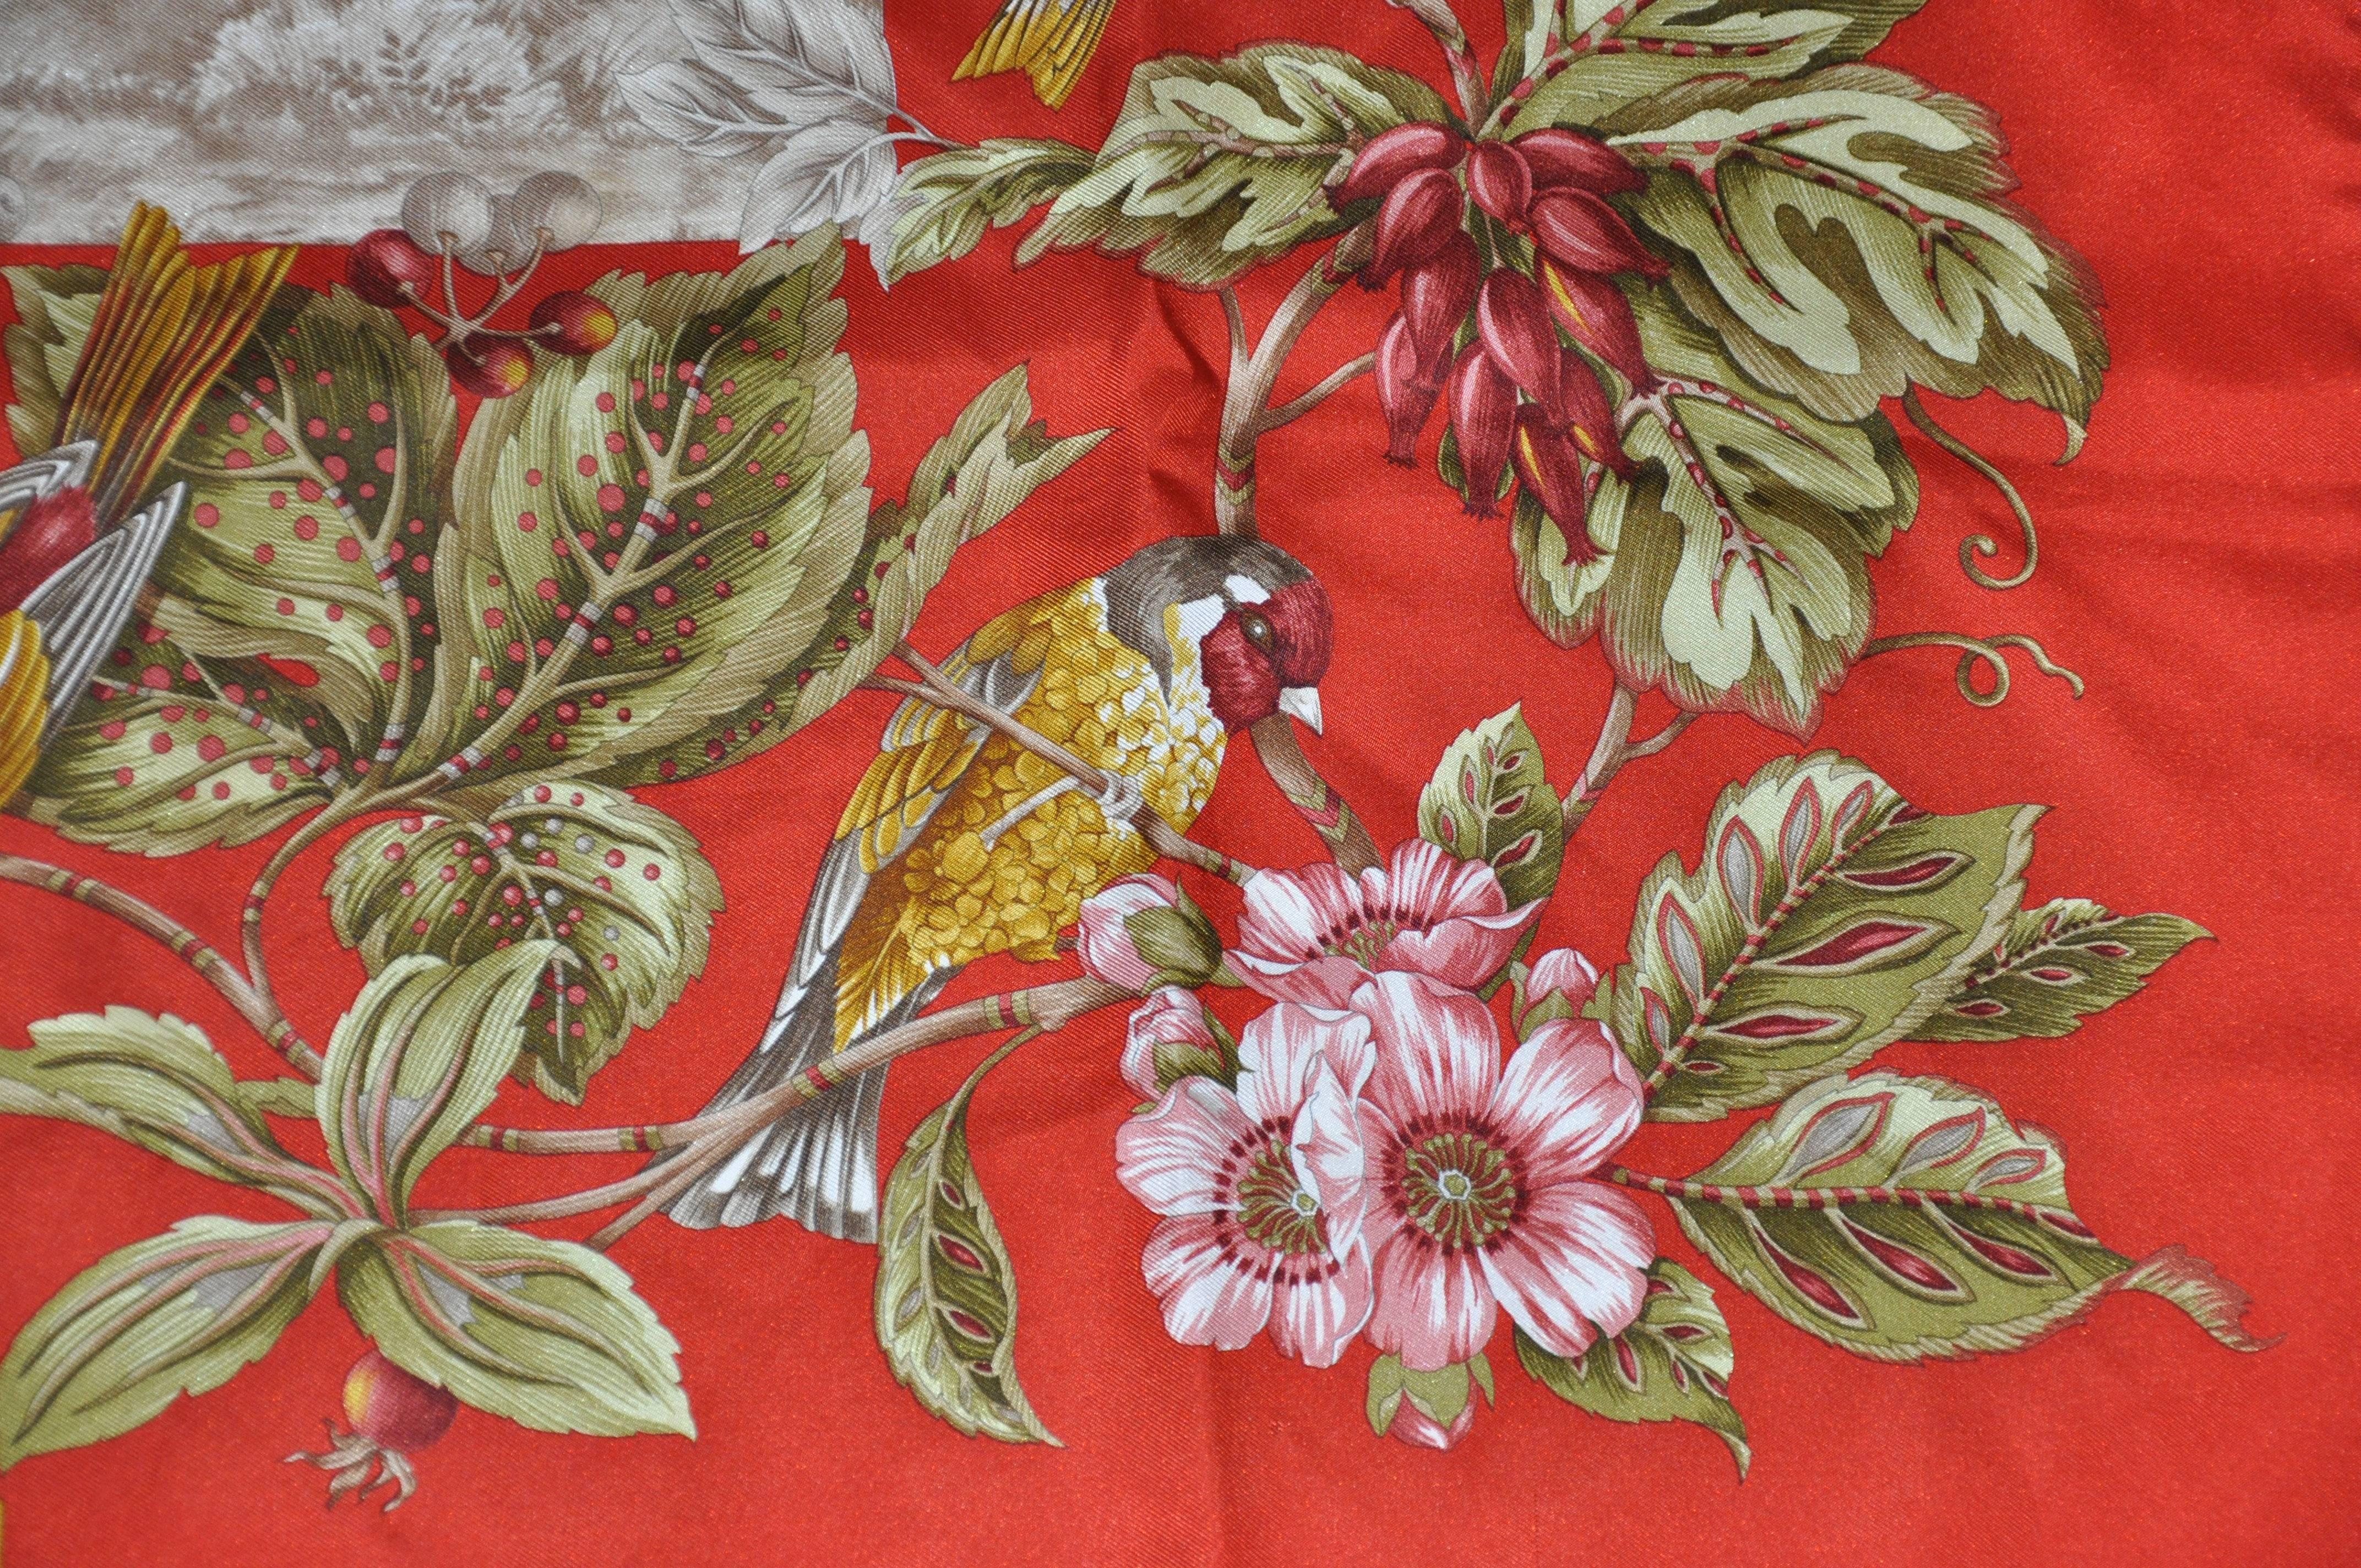         Salvatore Ferragamo wonderful signature multi-color multi-floral silk scarf is accented with birds scattered throughout. The silk scarf is finished with hand-rolled edges and measures 33 1/2